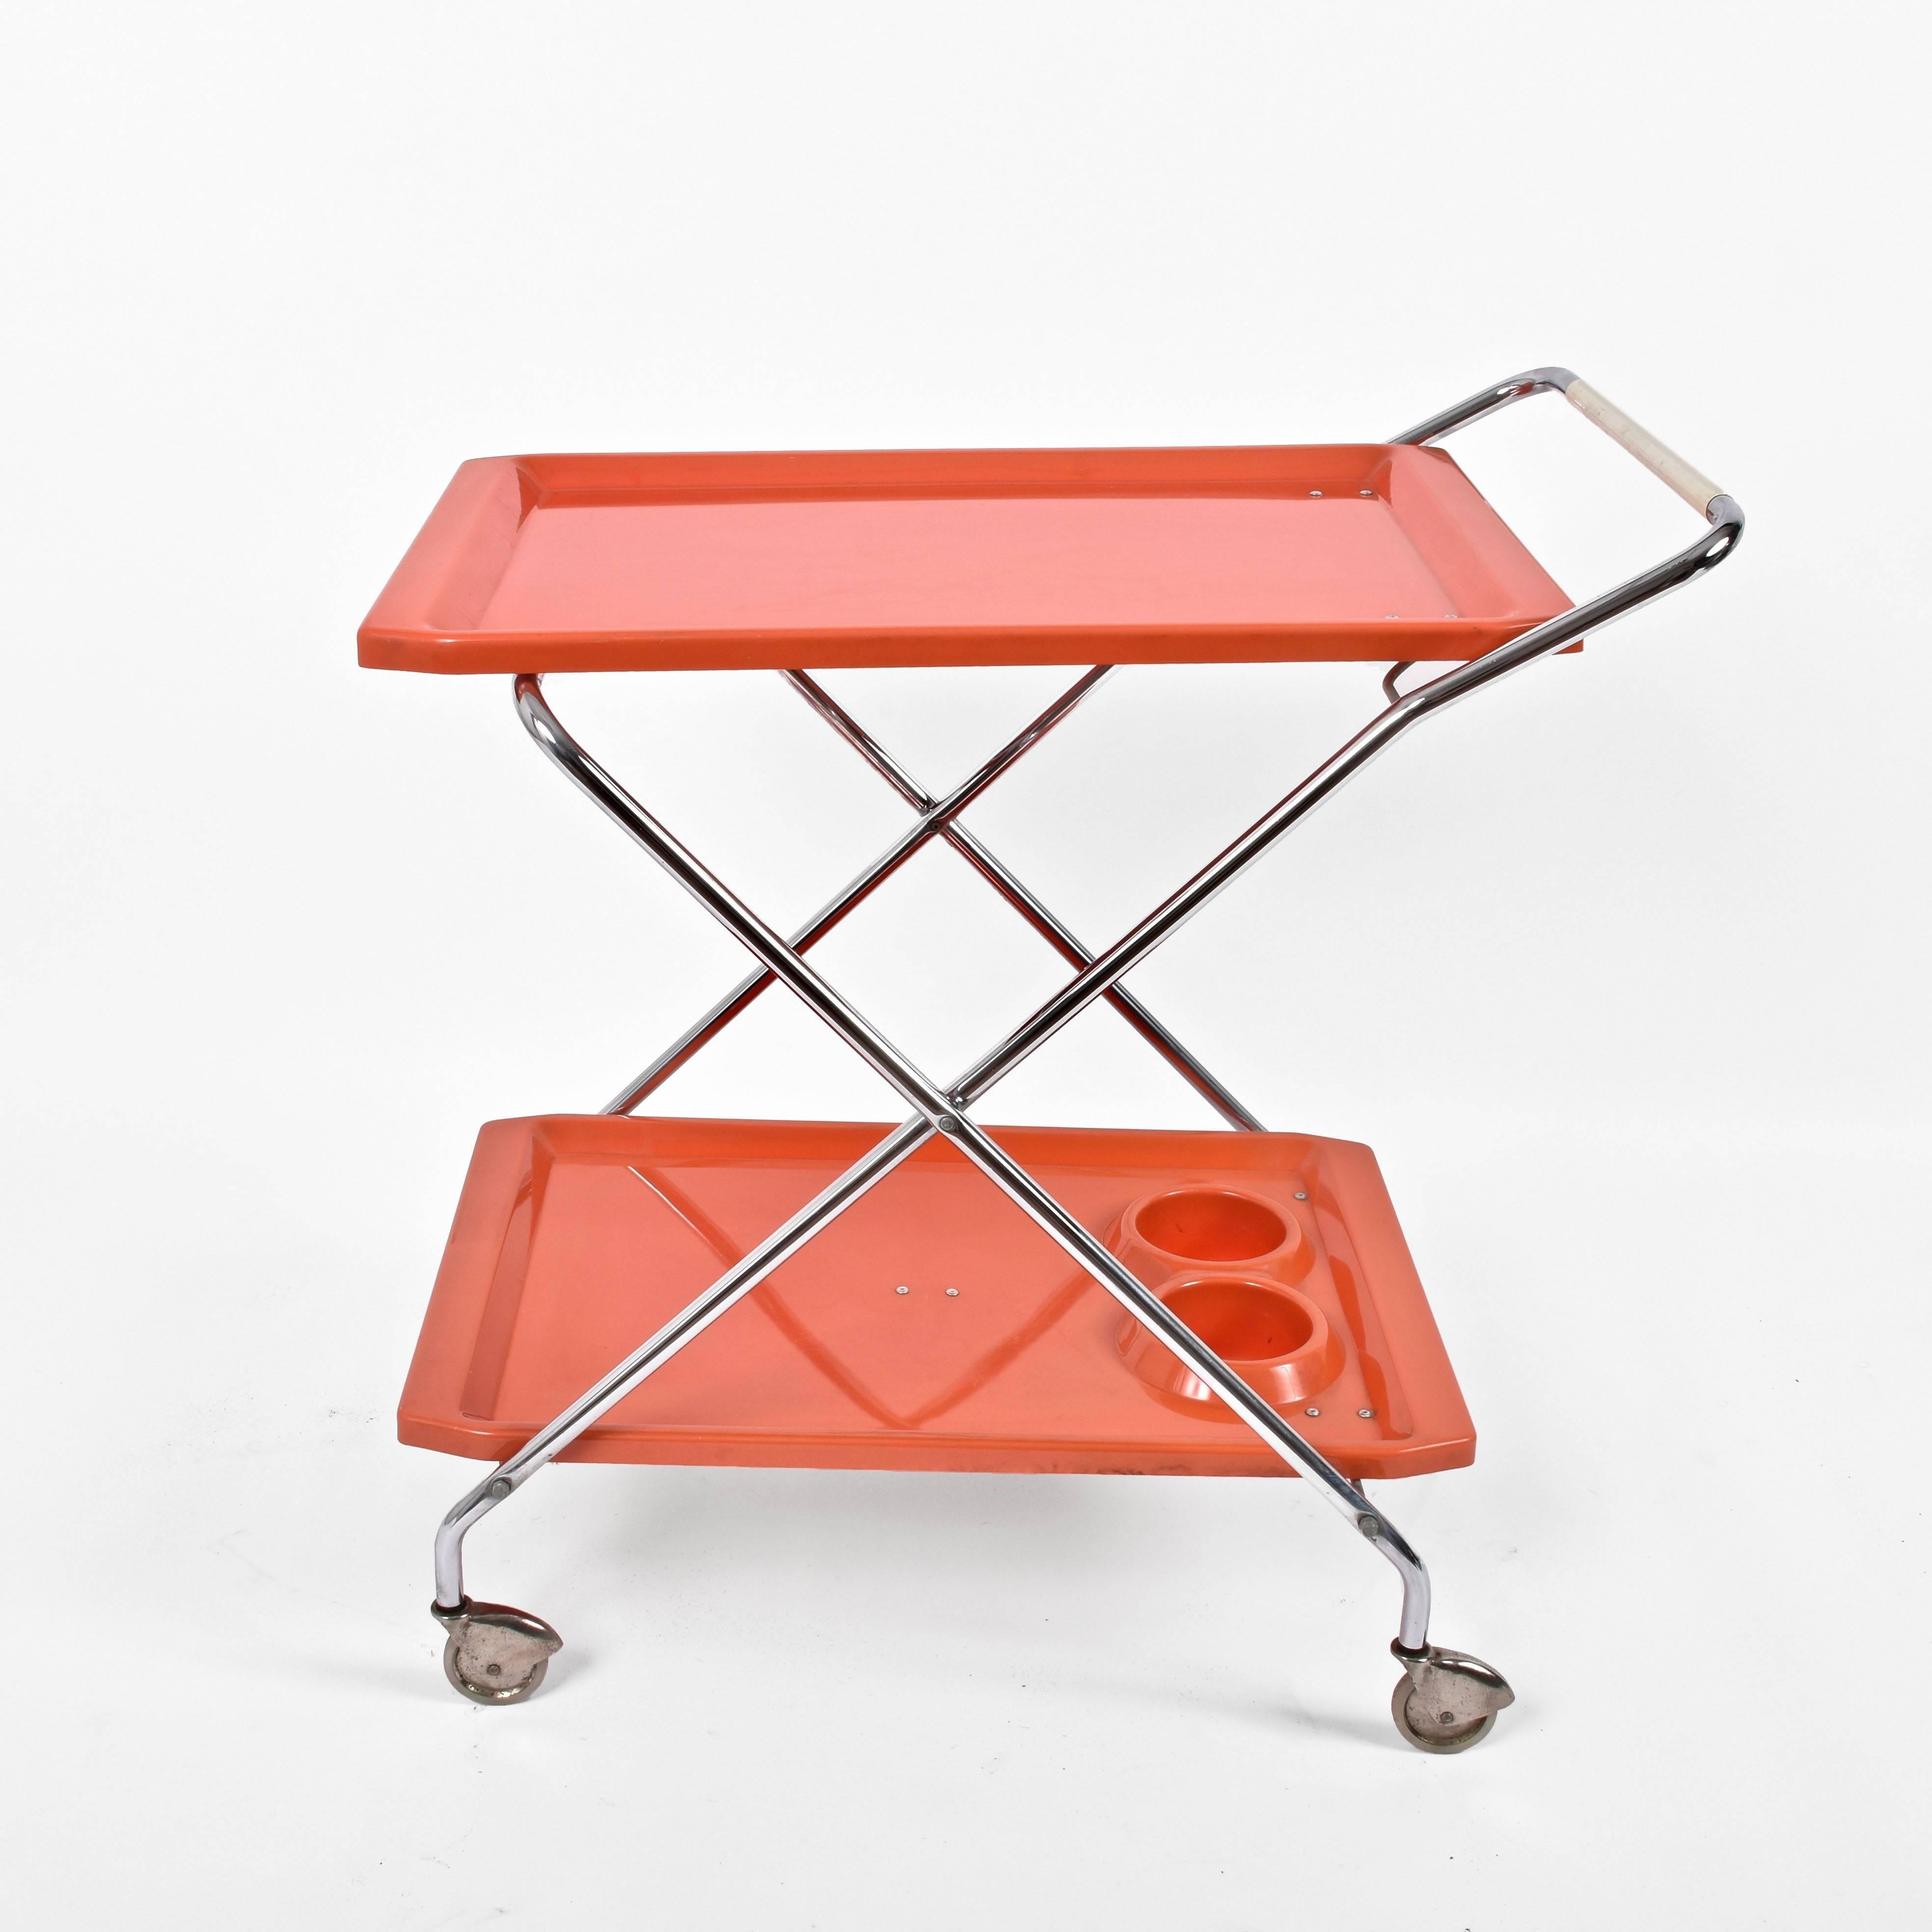 Rare midcentury bar cart in good in very good conditions. This serving table was produced in Italy during the 1950s.

This foldable chrome-plated metal and orange plastic cart represent 1950s Italian design in its essence: pure lines, bold colors